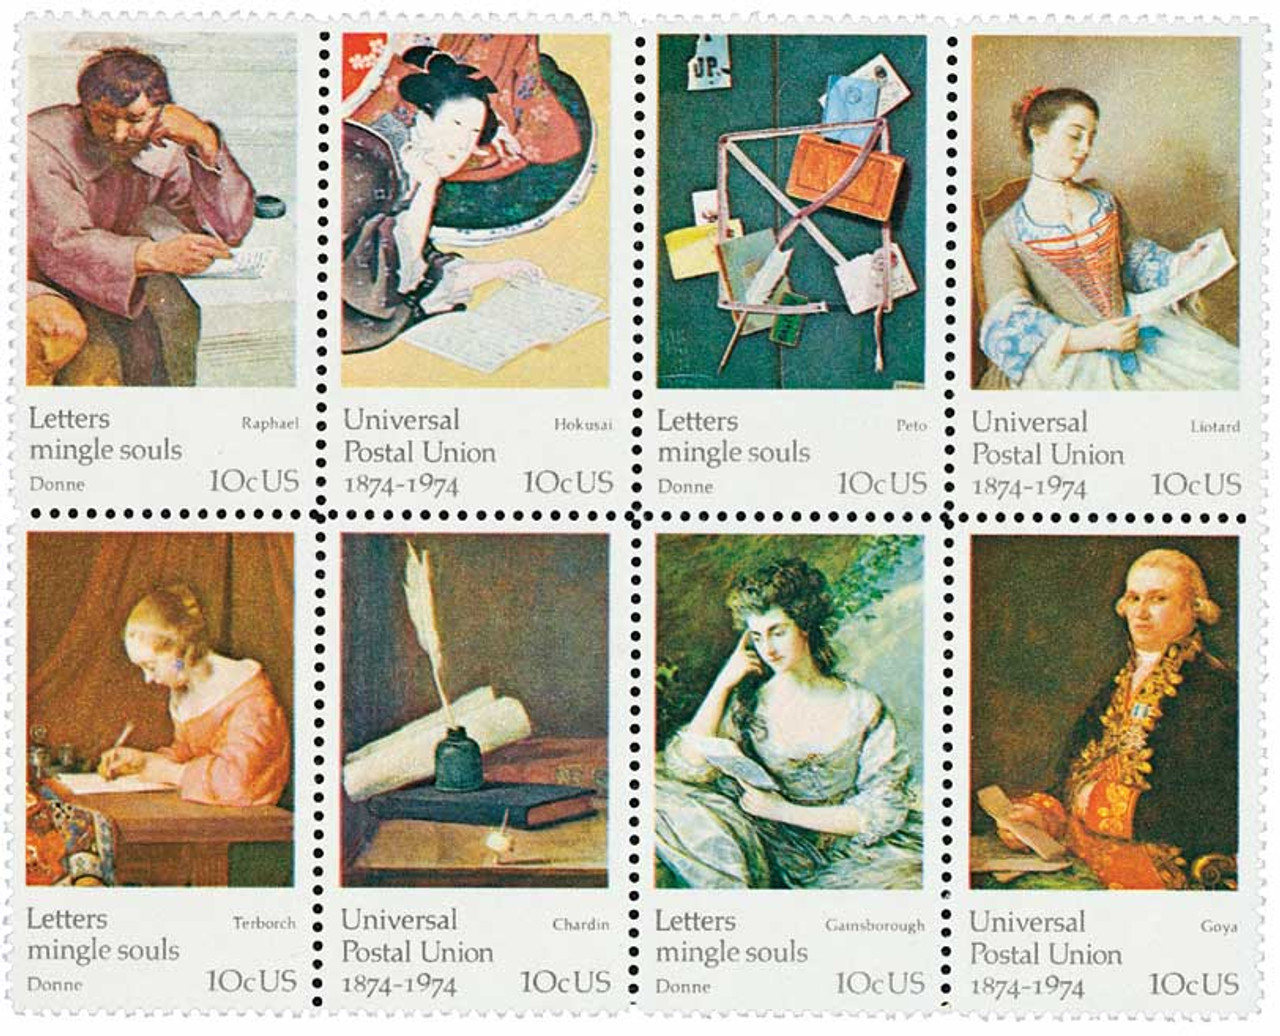 Vintage Australian Postage Stamps Used With Post Marks for Art